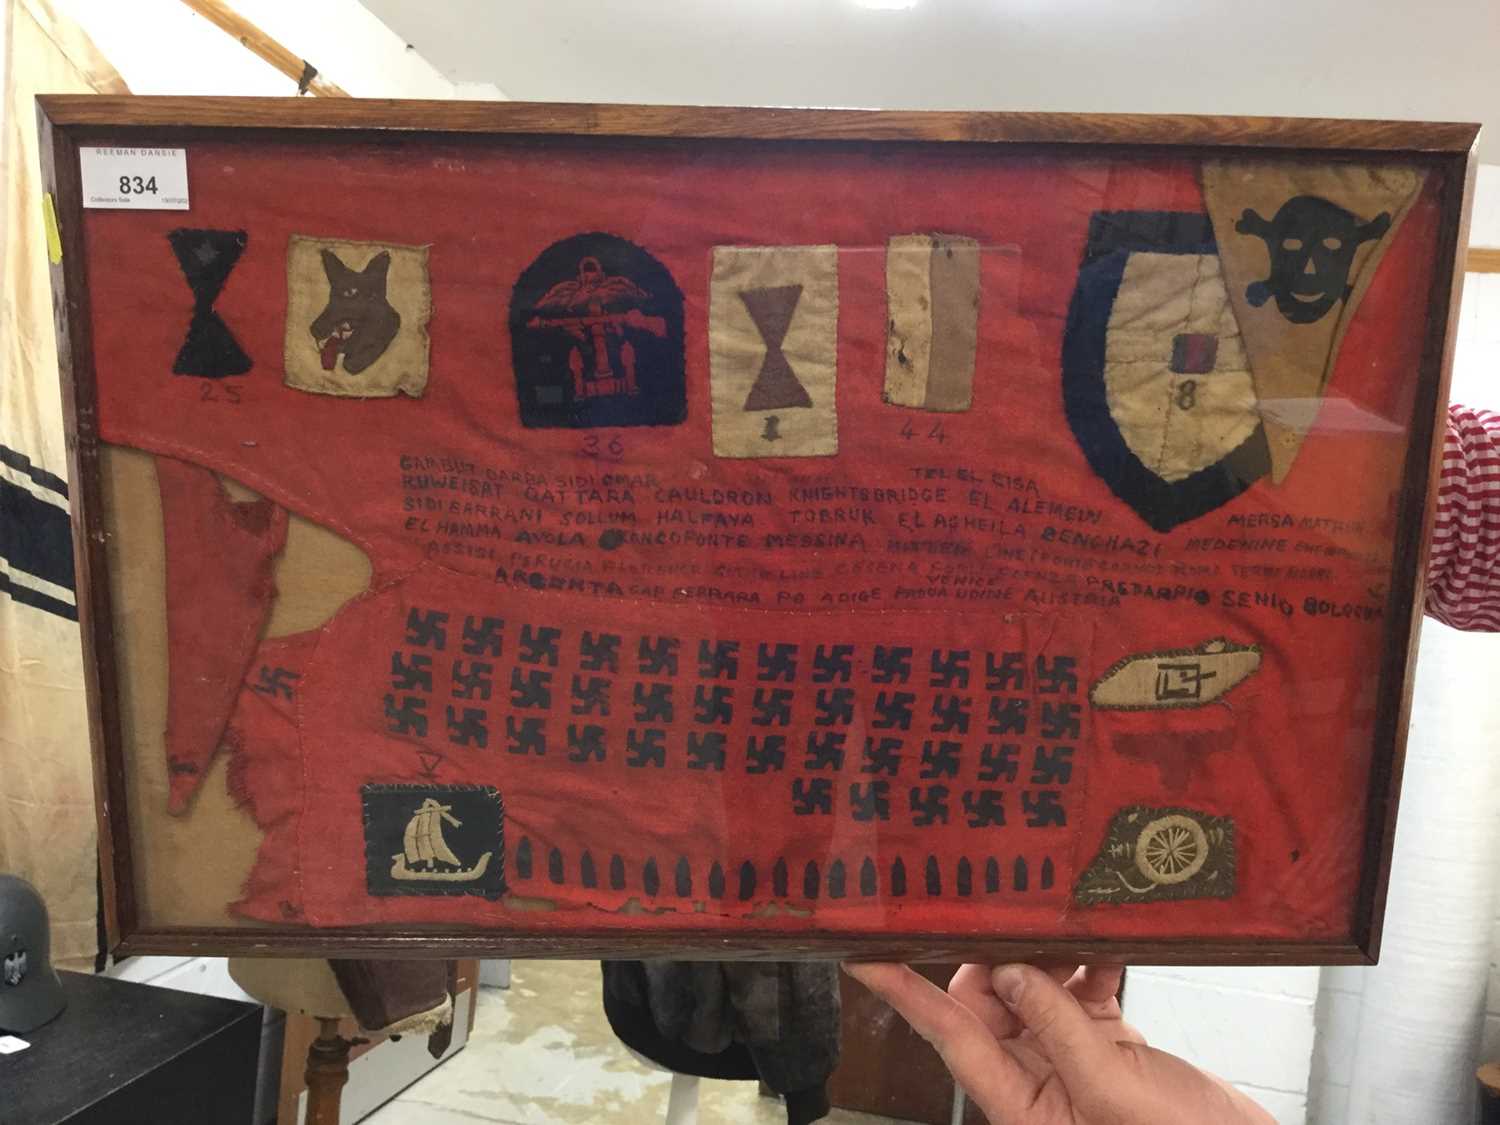 Lot 834 - Interesting Second World War pennant, a sovenir of The North African campaign, with Battle Honours named in ink, depictions of Swastikas and Artillery shells, together with a selection of British d...